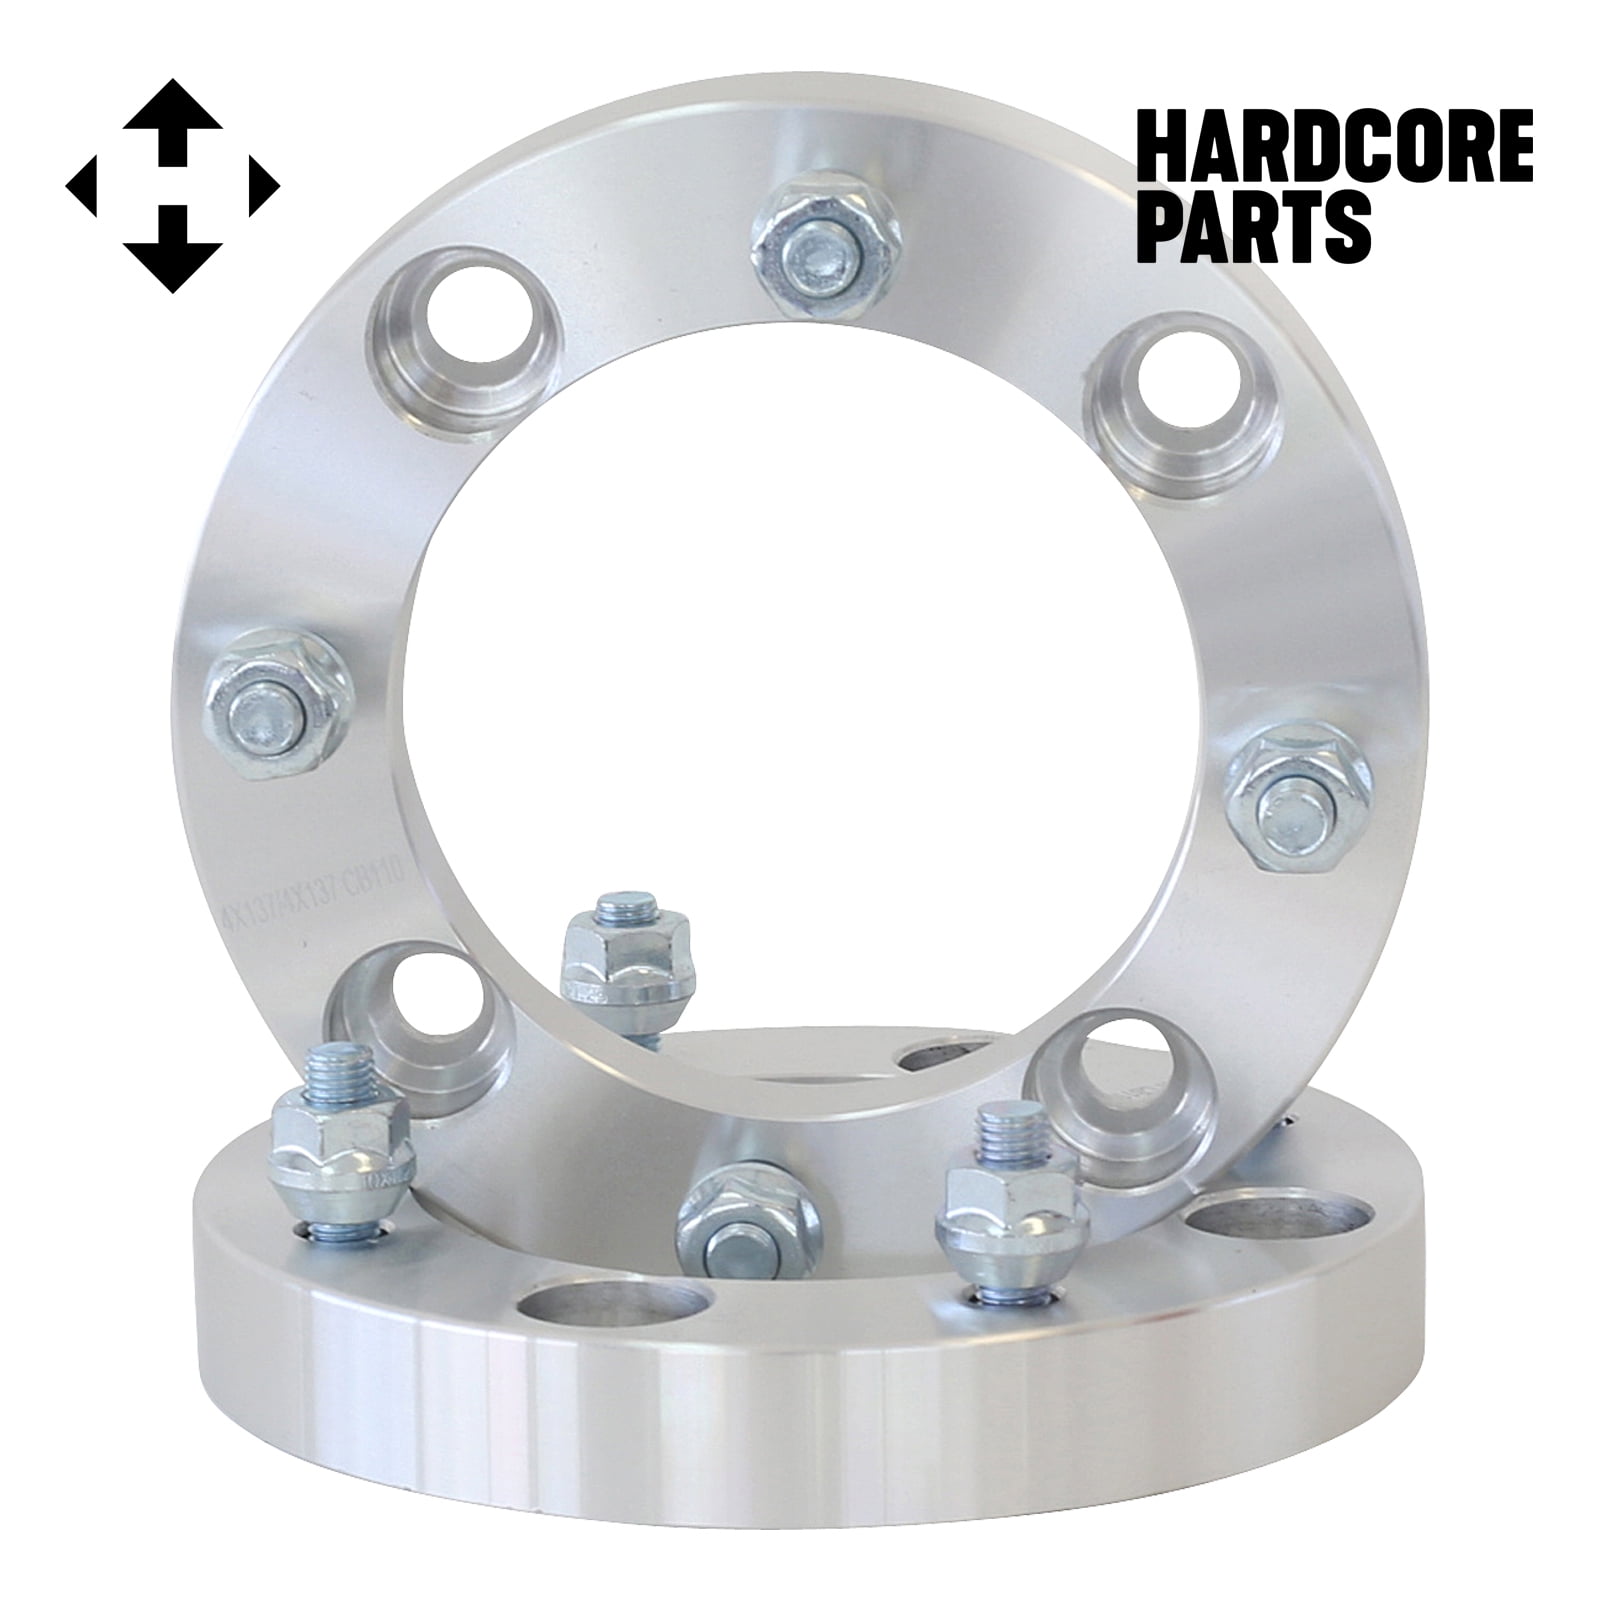 2 QTY ATV Wheel Spacers 4 CAN-AM Bombardier Renegade Outlander Commander Kawasaki Mule Prairie Brute Force Bayou 4x137 fits all 4x137 bolt patterns 2 inch Per Side 